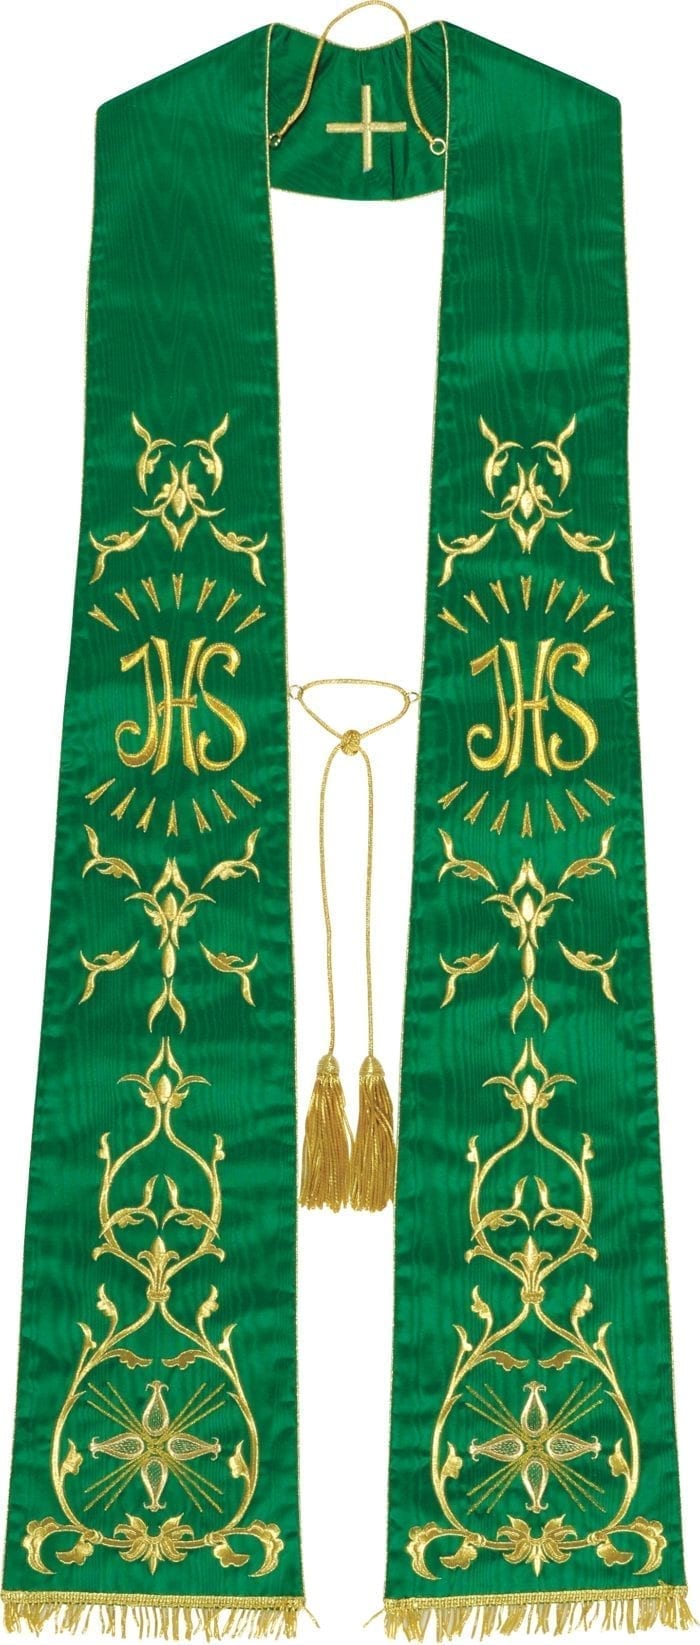 Maranatha Lab stole "Jesus" with a classic cut in pure silk with gold embroidery and JHS symbol